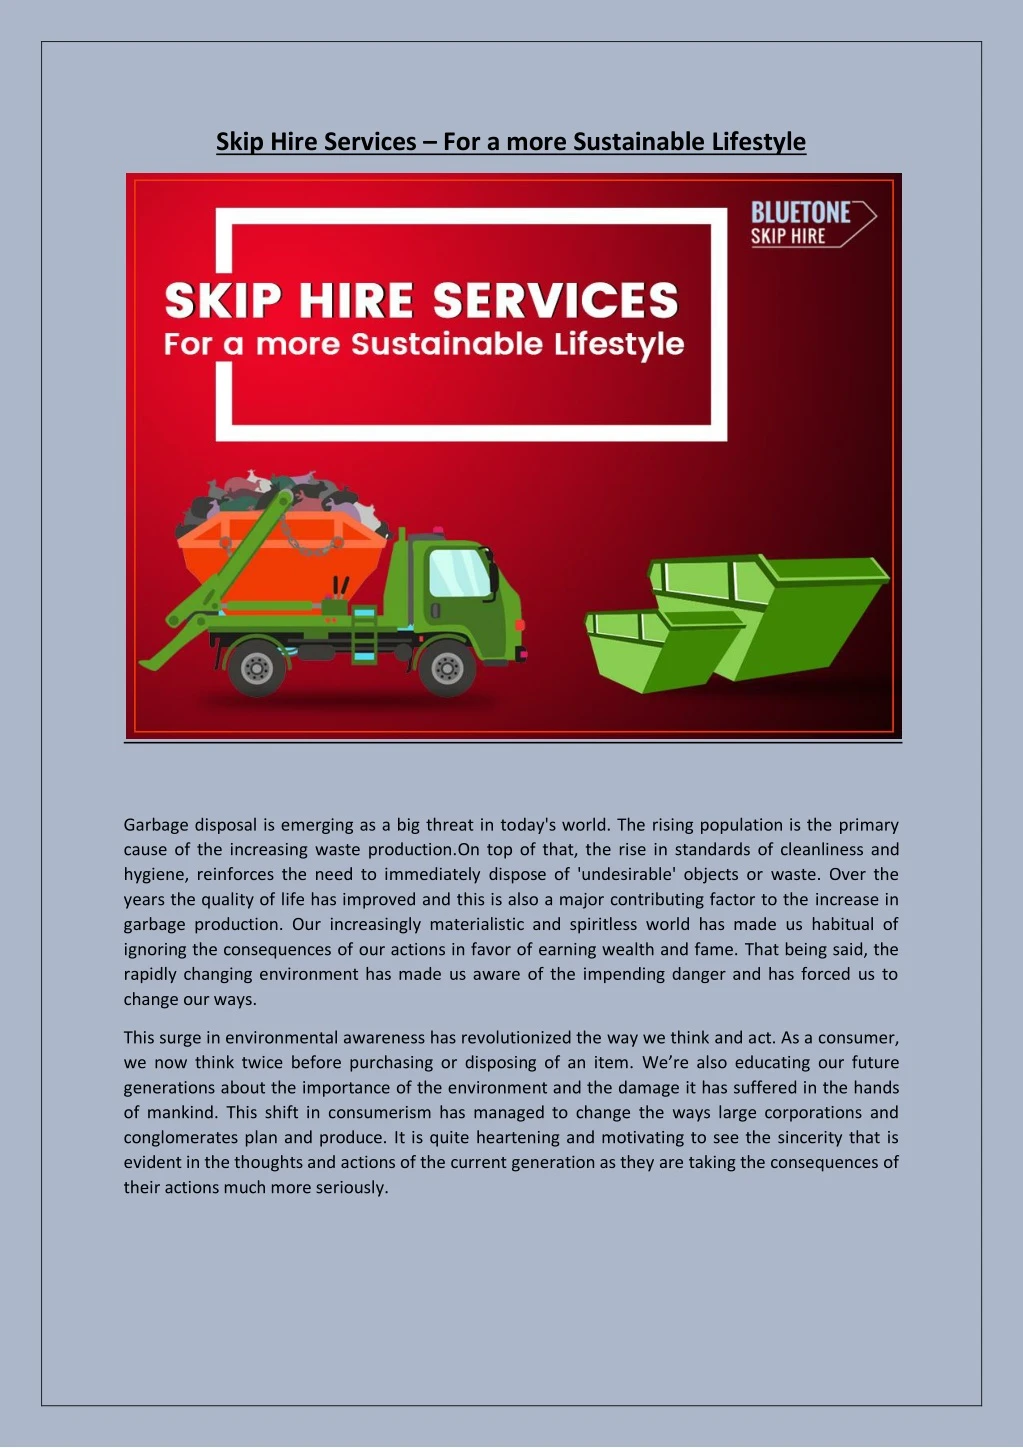 skip hire services for a more sustainable